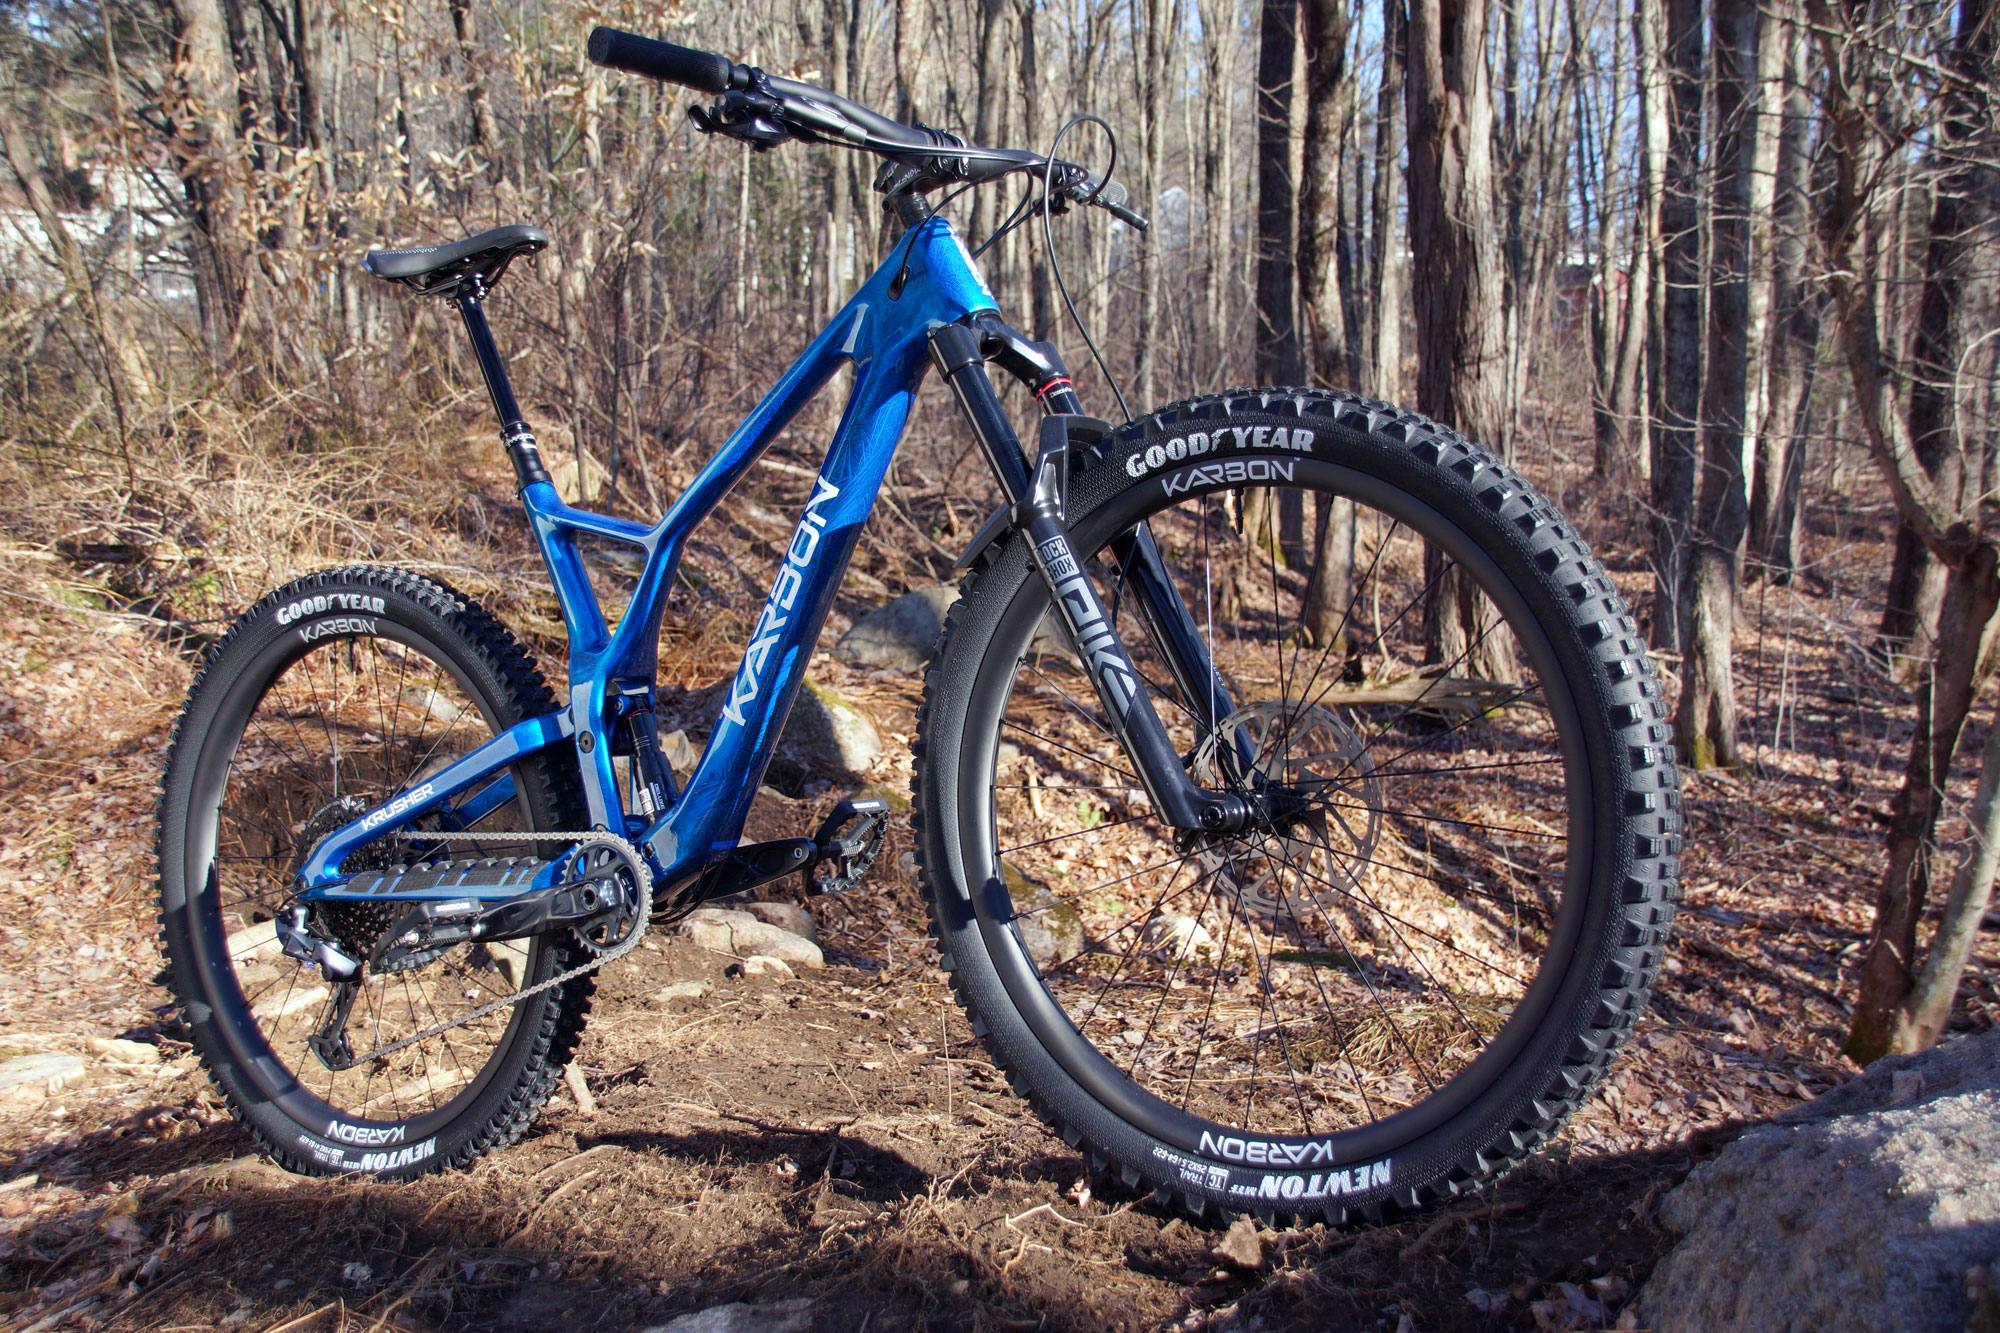 Karbon Krusher GX on the trails